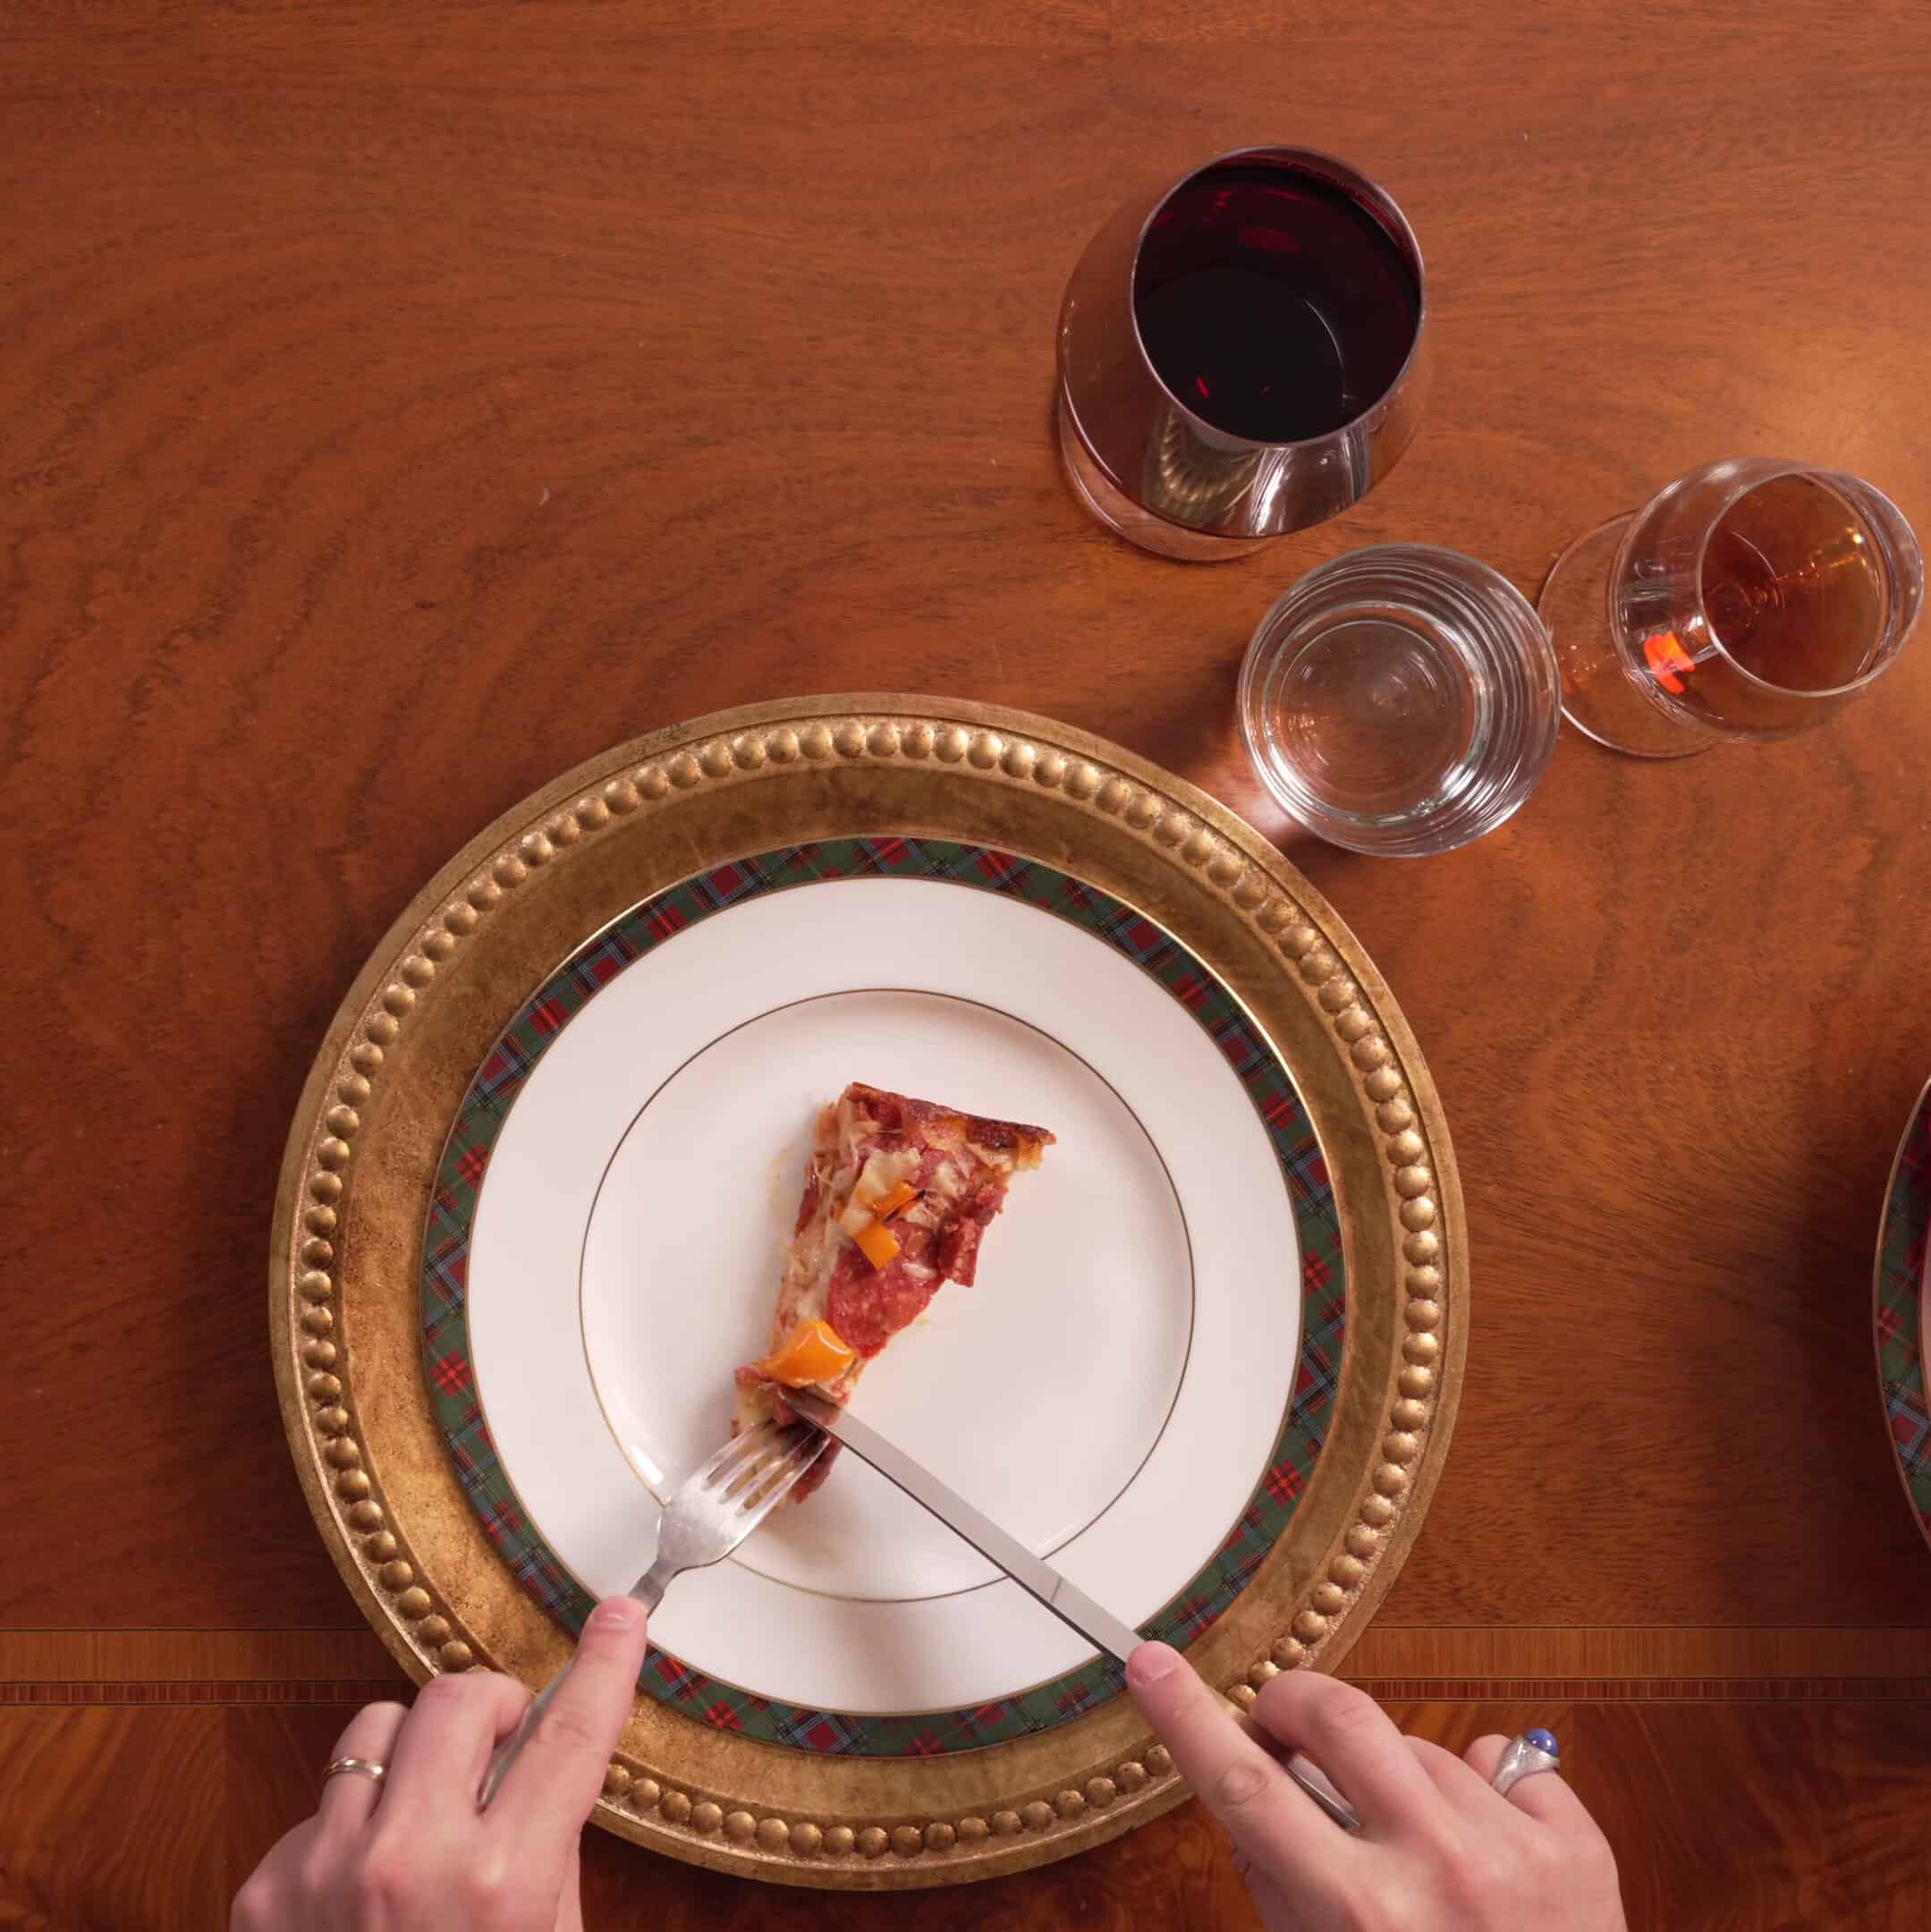 The Italians used their fork and knife when eating their pizza.